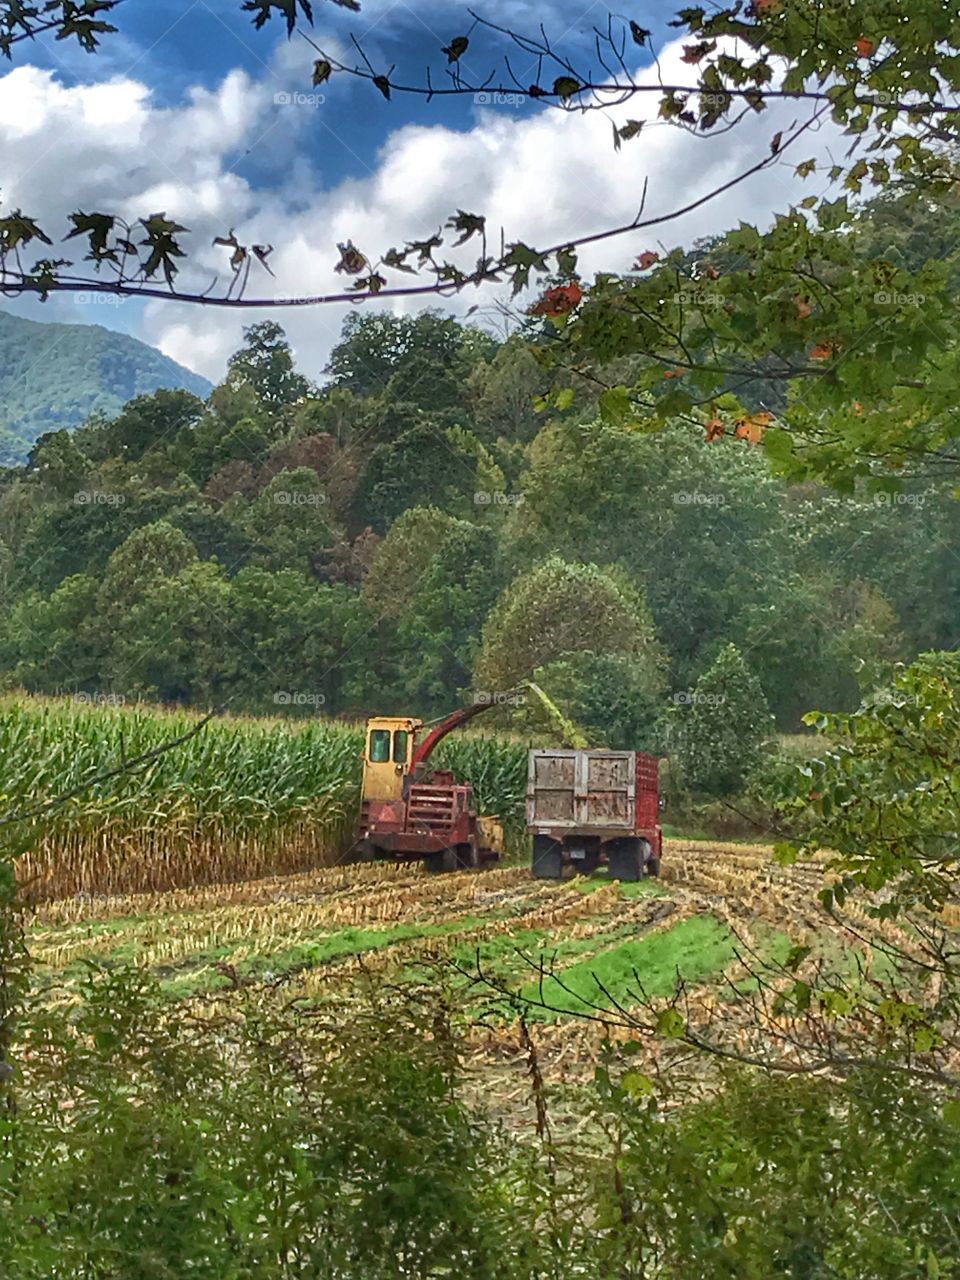 Truck and equipment for harvesting a corn crop 